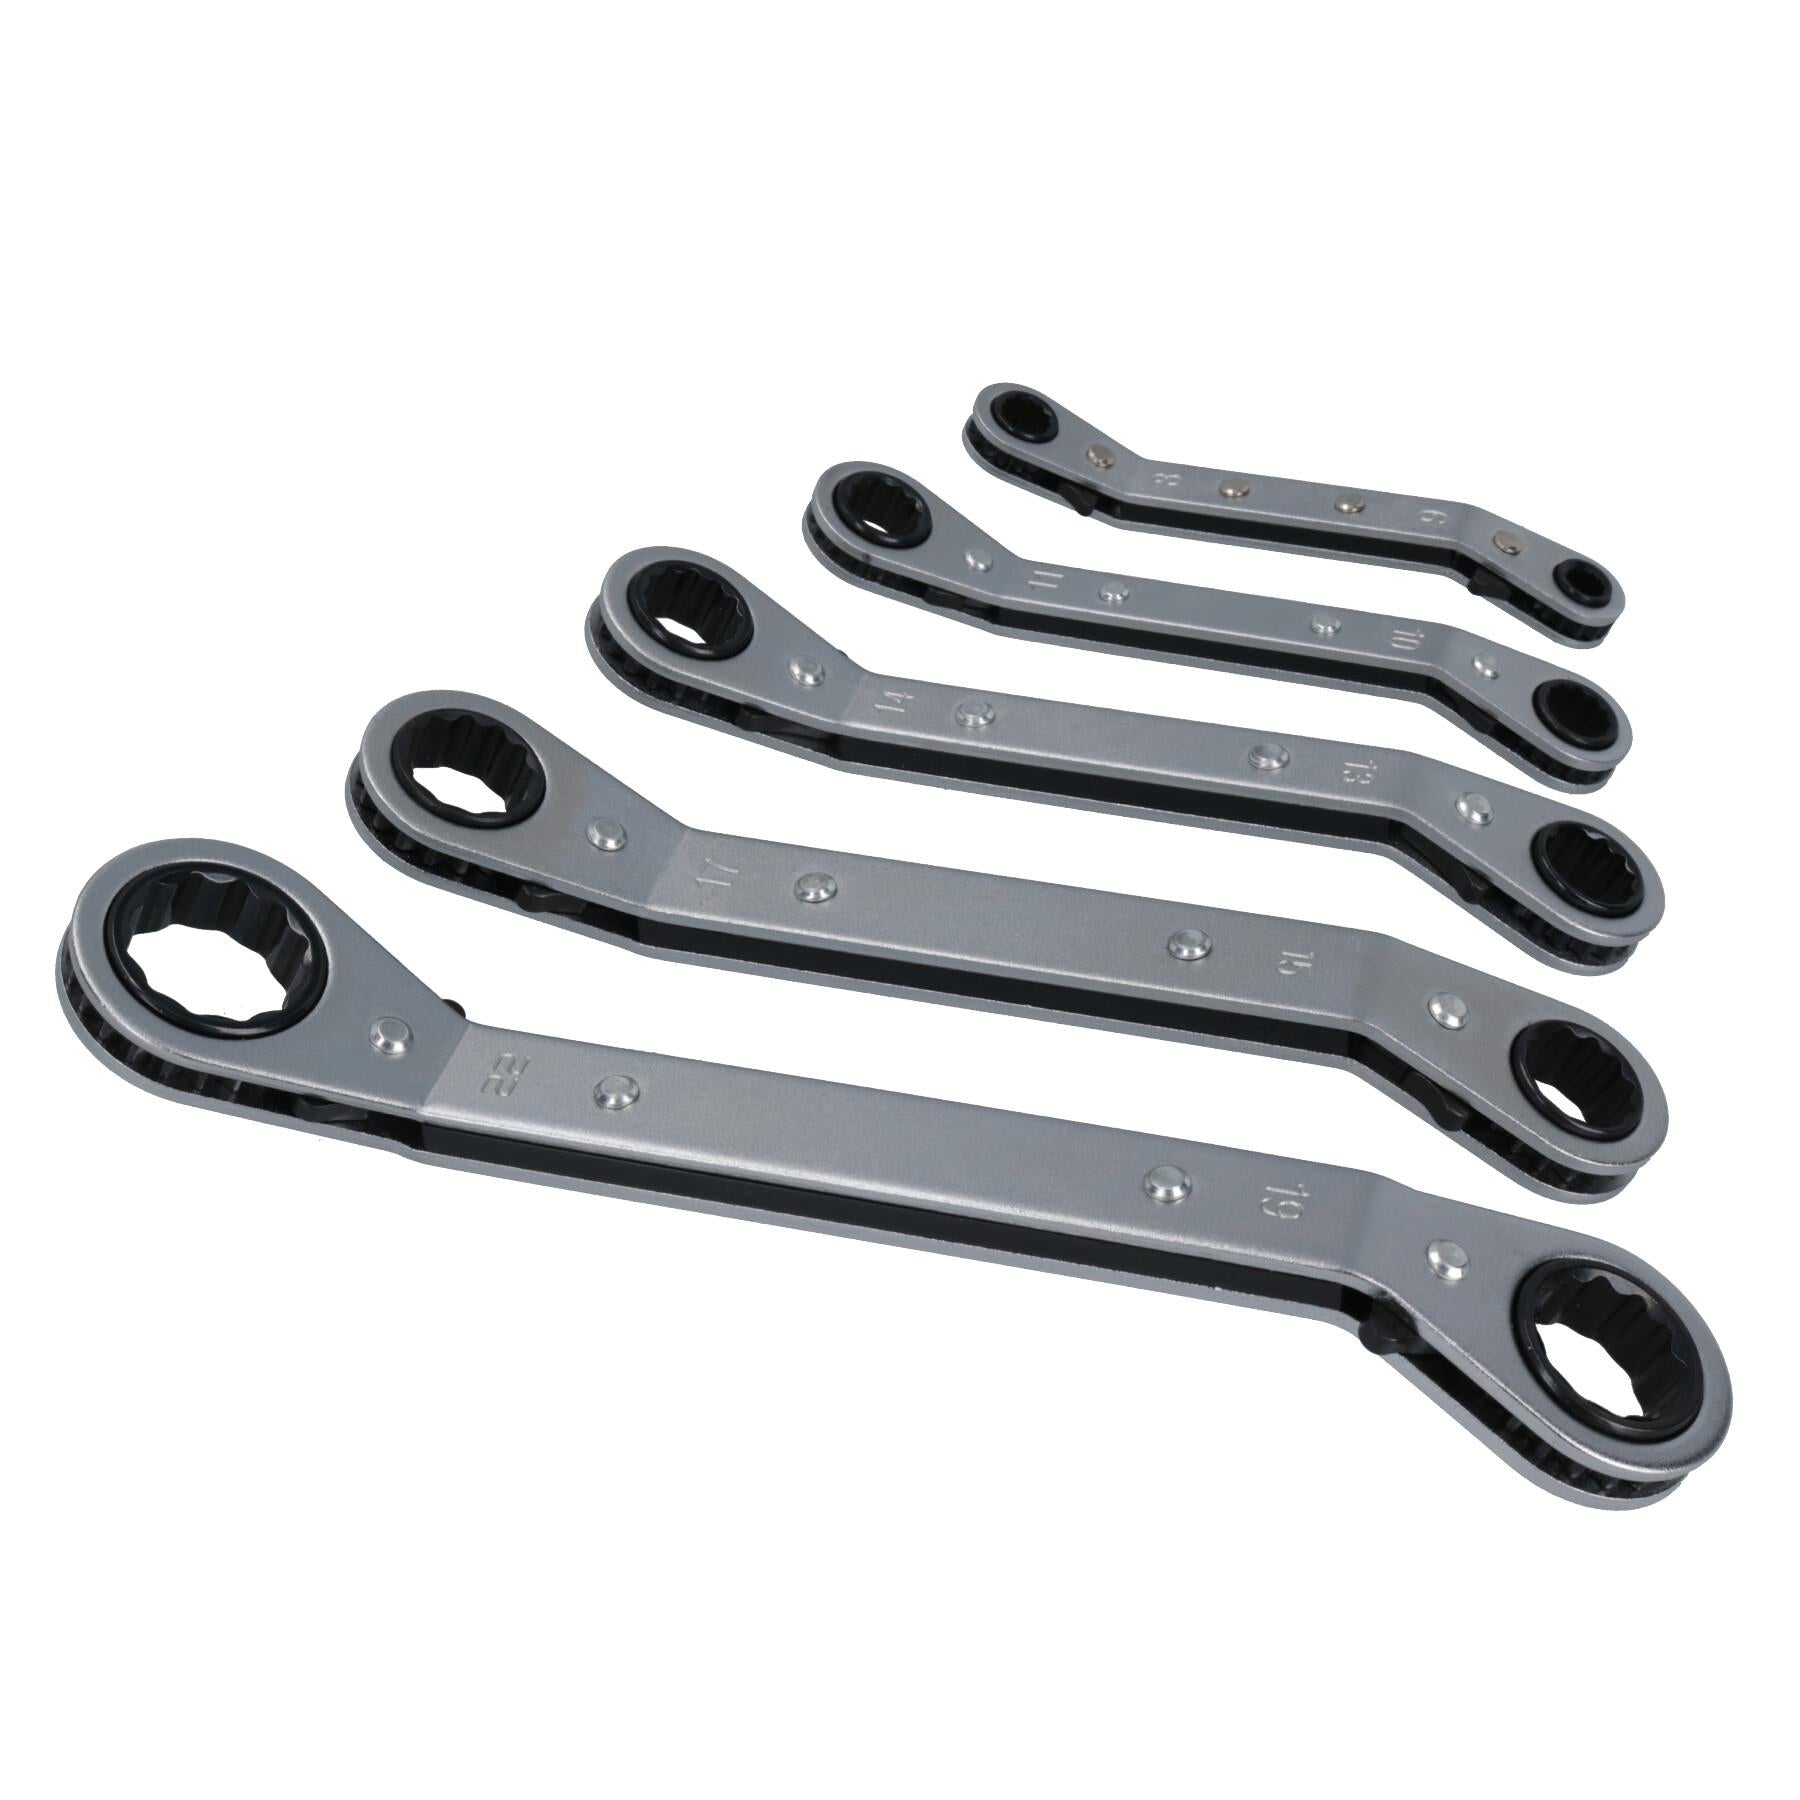 5pc Offset Metric Ratchet Ring Spanners Wrench Cranked Reversible 6-22mm